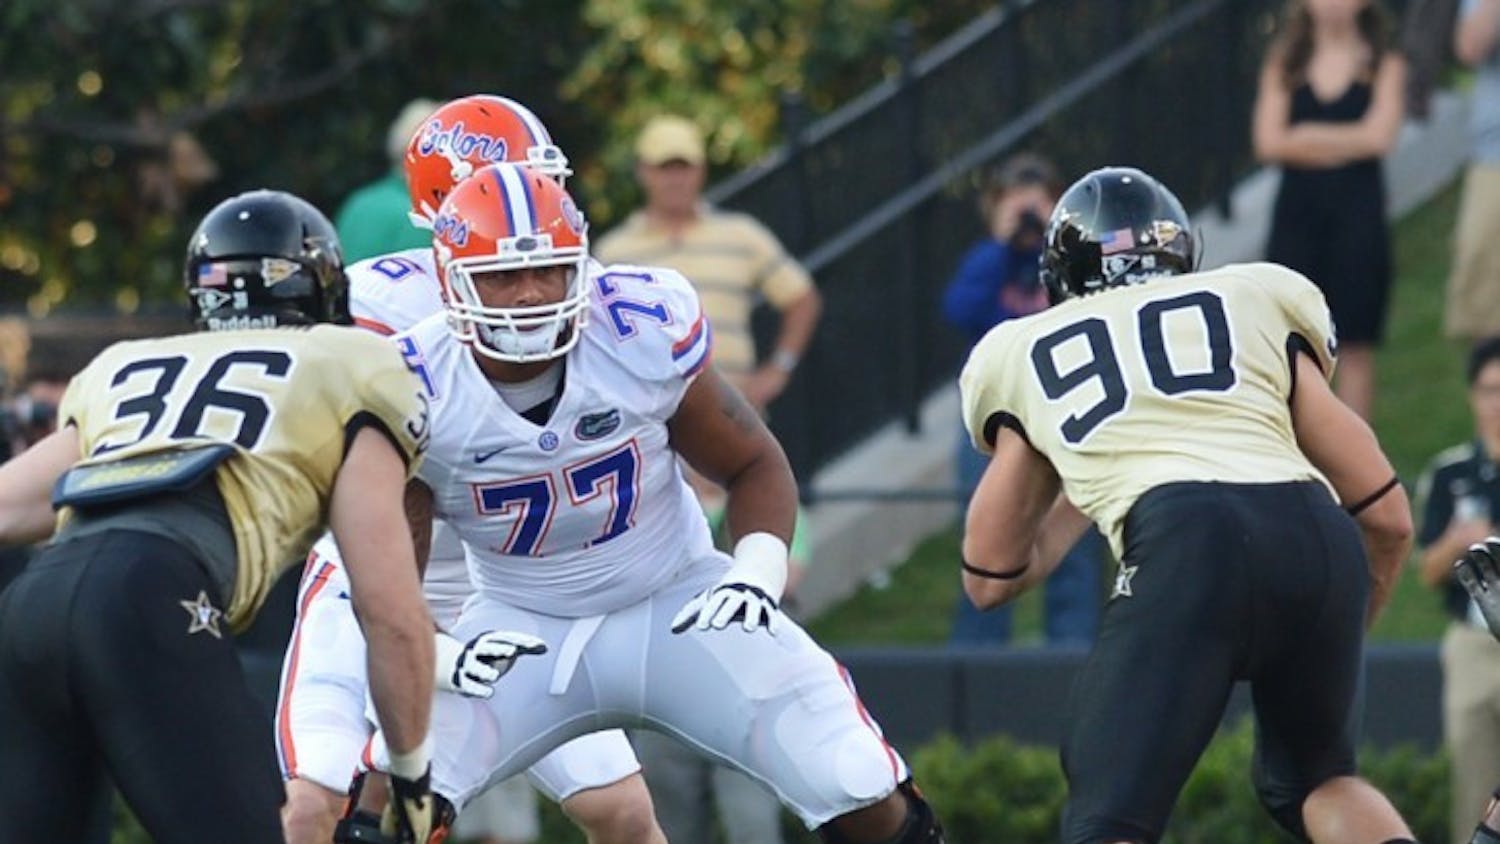 Guard Ian Silberman (77) blocks for quarterback Jeff Driskel against Vanderbilt in 2012. Silberman will transfer from Florida and will play out his final season of eligibility elsewhere next season.&nbsp;